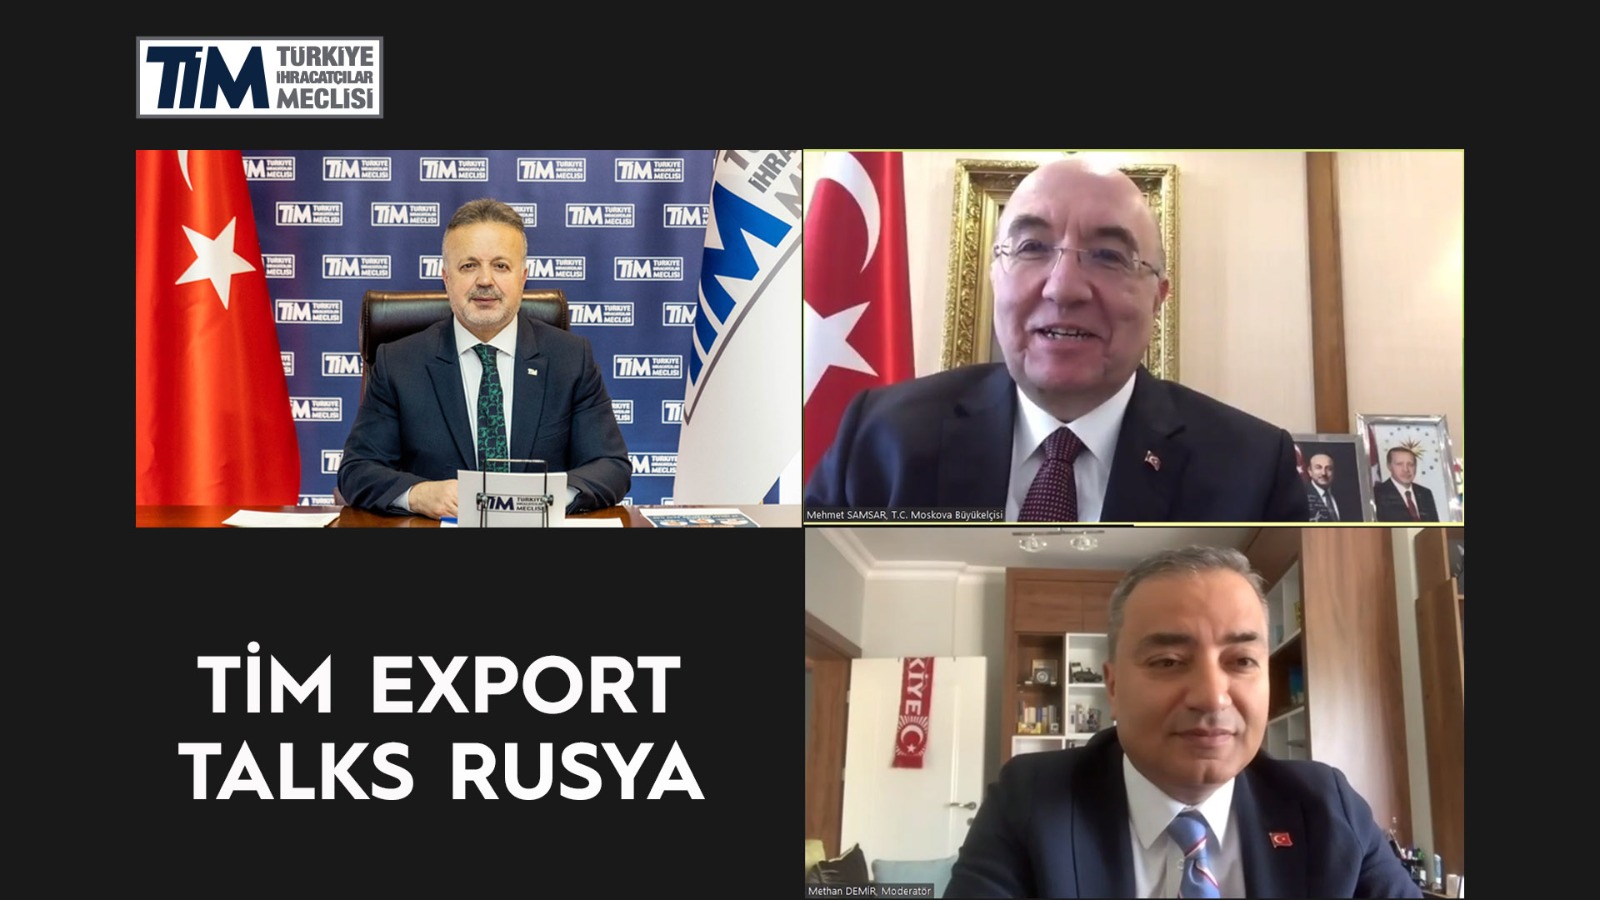 TİM held the sixth “TİM Export Talks” with the participation of the Ambassador of the Republic of Türkiye to Moscow